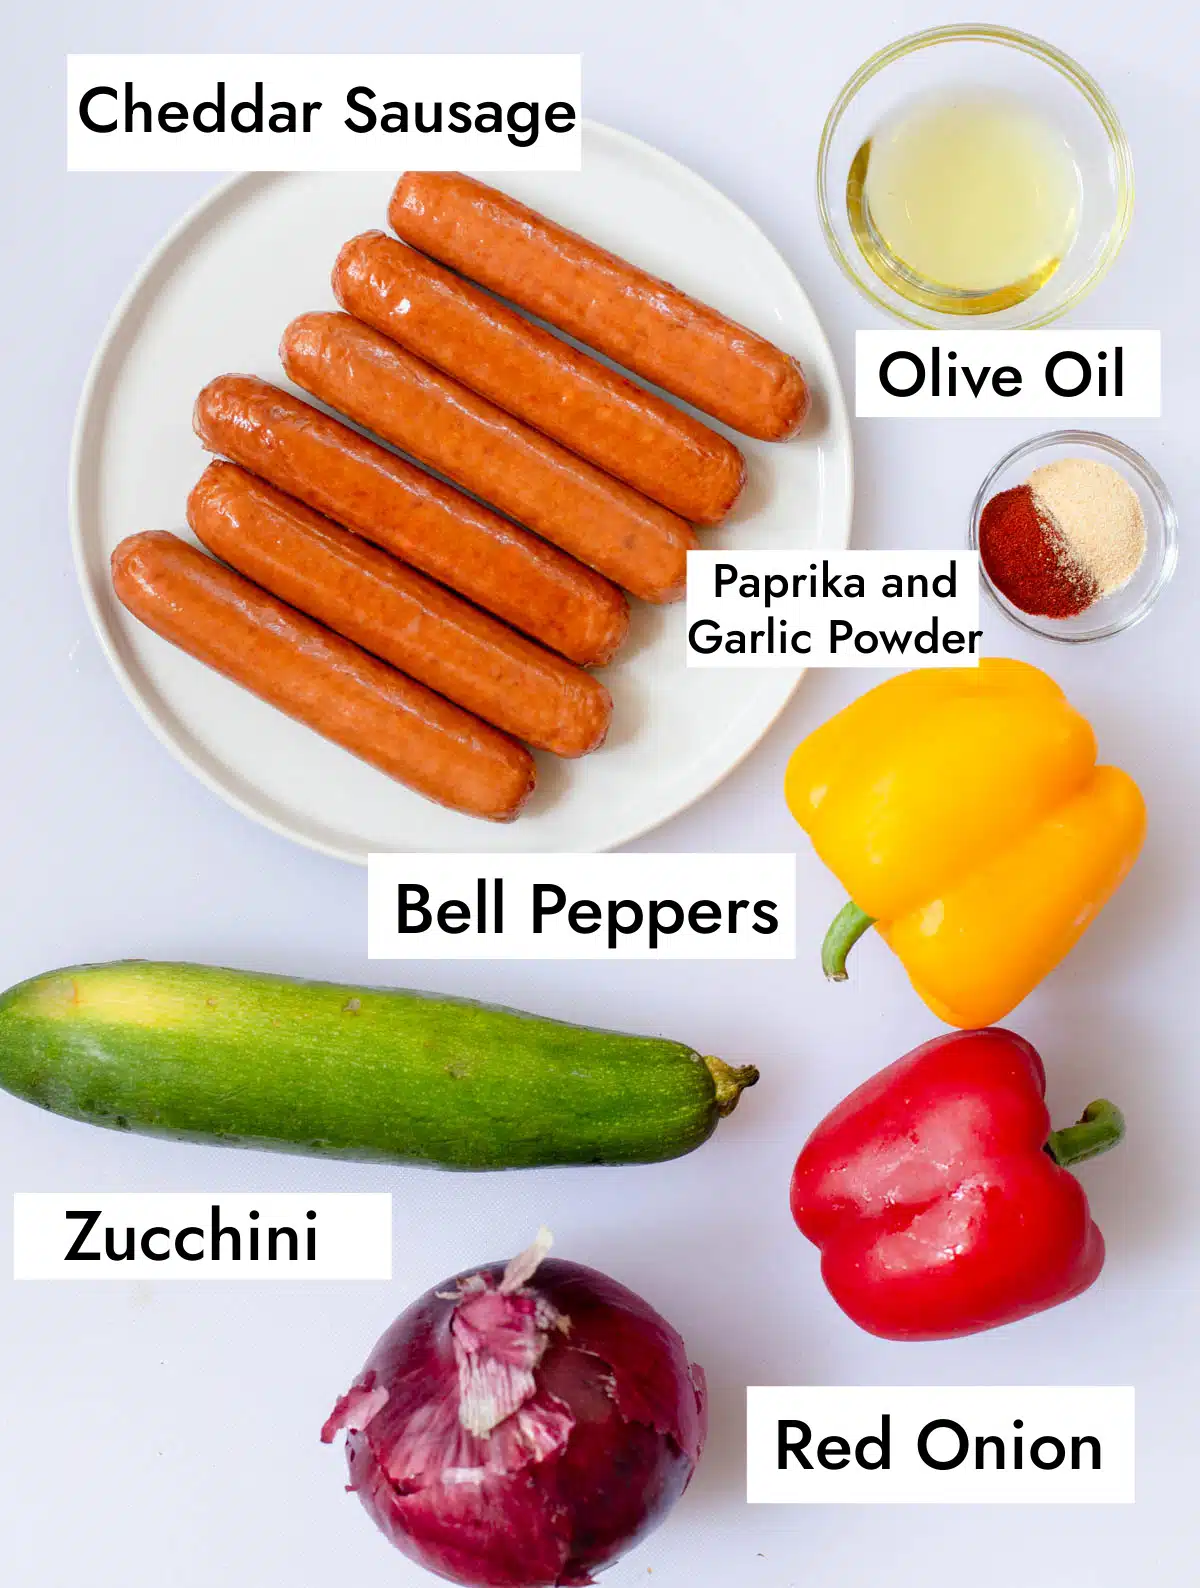 Ingredients in Grilled Cheddar Sausages including cheddar sausage, olive oil, paprika, garlic powder, bell peppers, zucchini, and red onion.